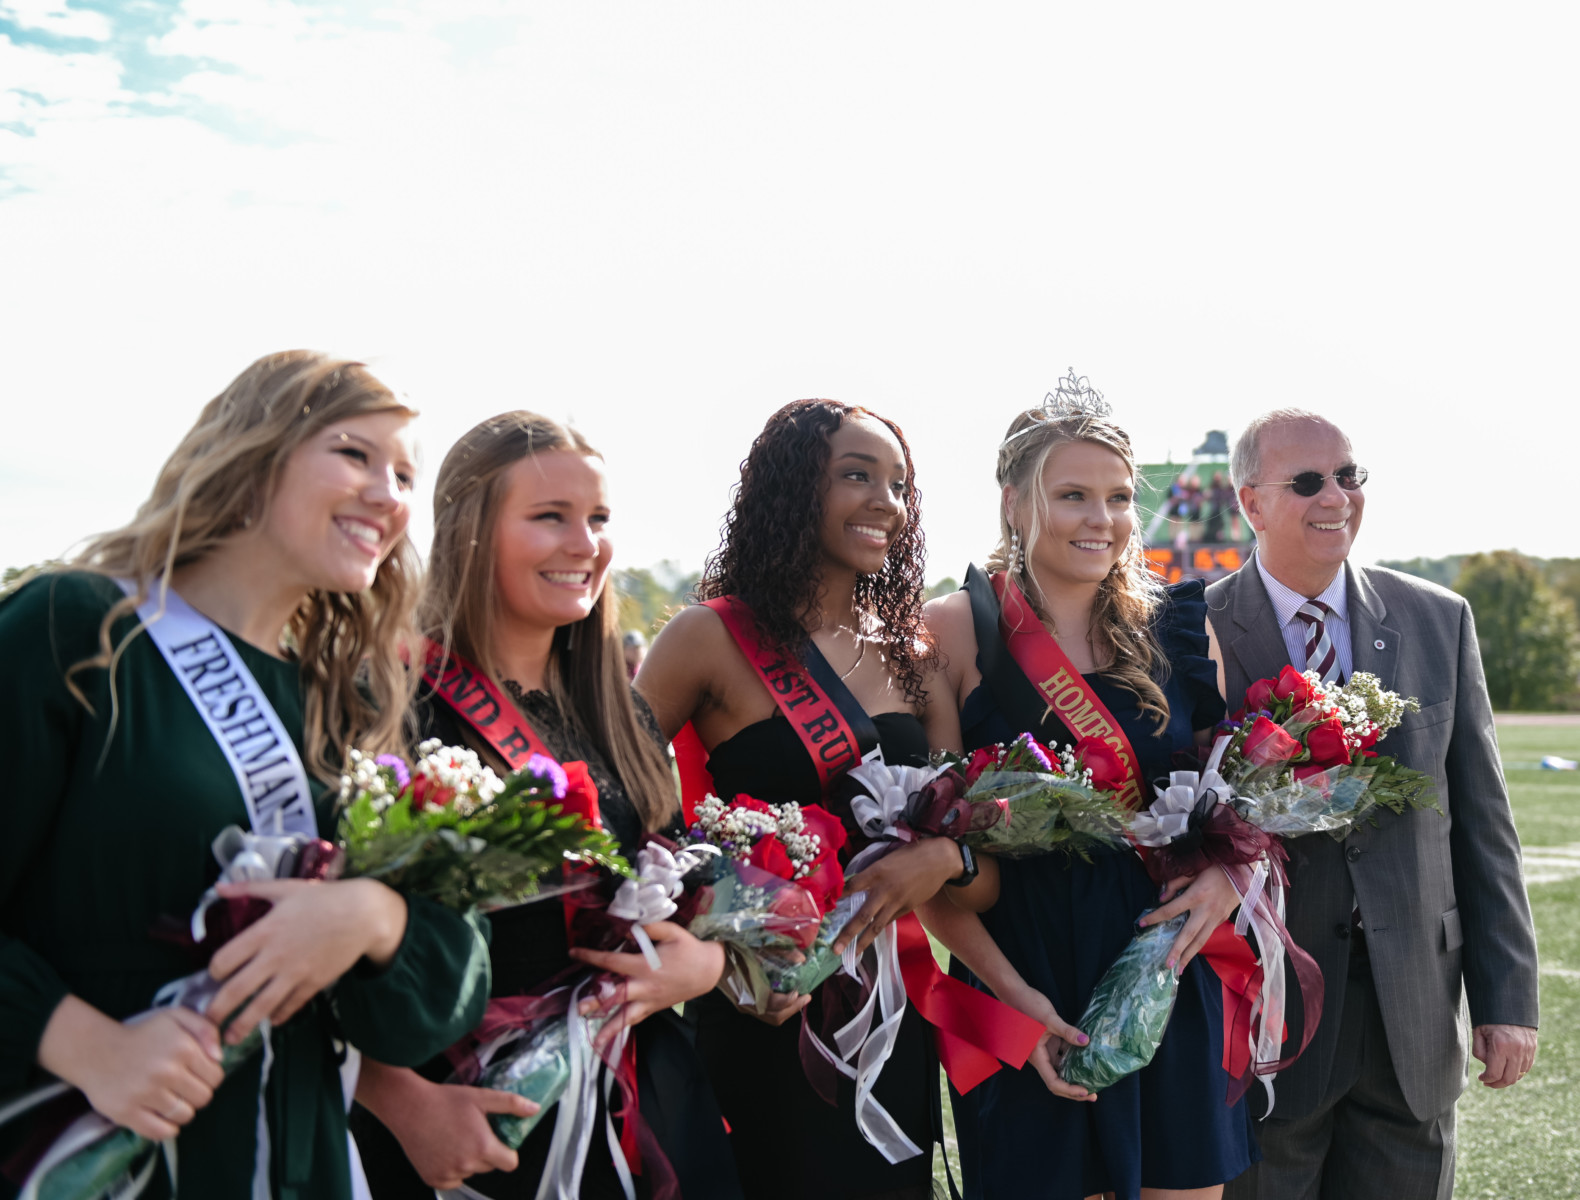 Savannah Gregory, representing FCA, second from right, was crowned Campbellsville University's 2019 Homecoming Queen. Dr. Michael V. Carter, president, is at far right. From left are: Ali Flaherty, freshman attendant; Hannah Kennedy, second runner-up, representing the Office of University Communications; Krystan Armstrong, first runner-up, representing the Black Student Association. (Campbellsville University Photo by Joshua Williams)